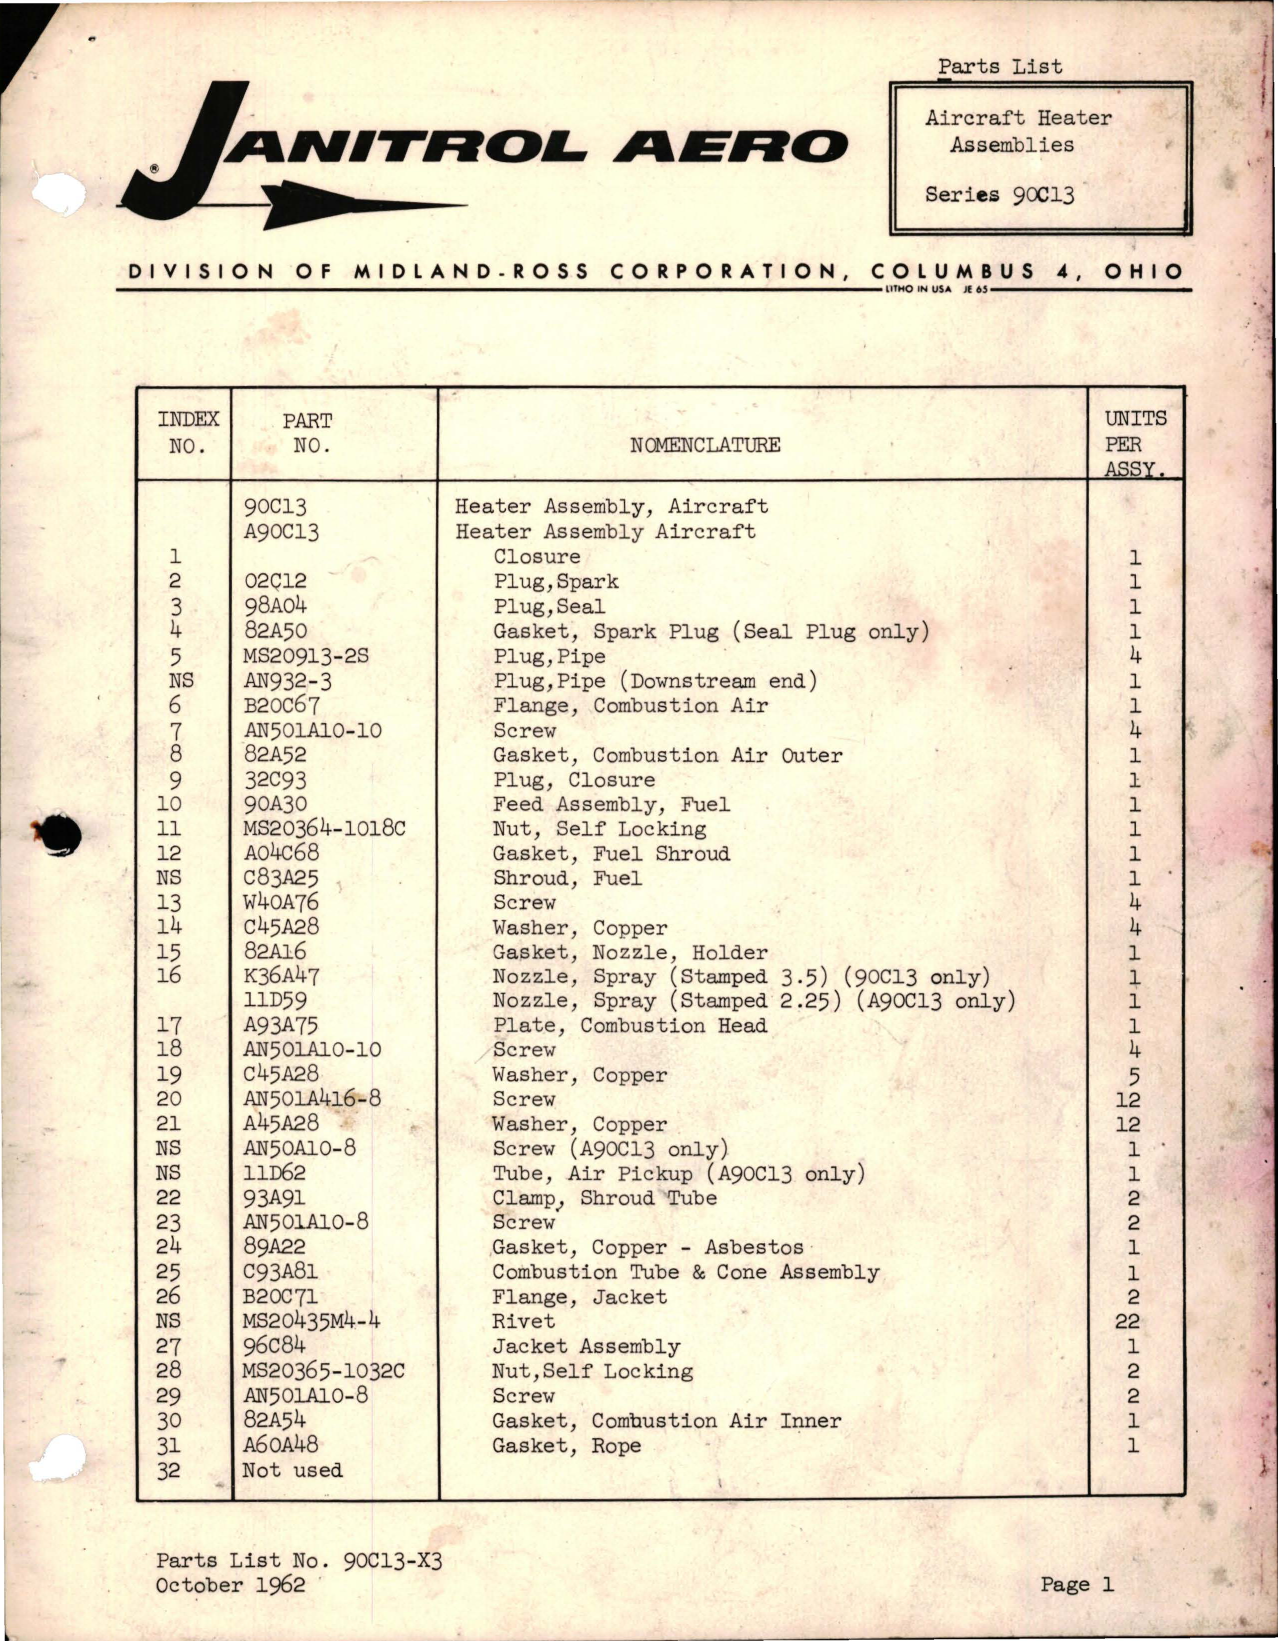 Sample page 1 from AirCorps Library document: Parts List for Aircraft Heater Assembly - Series 90C13